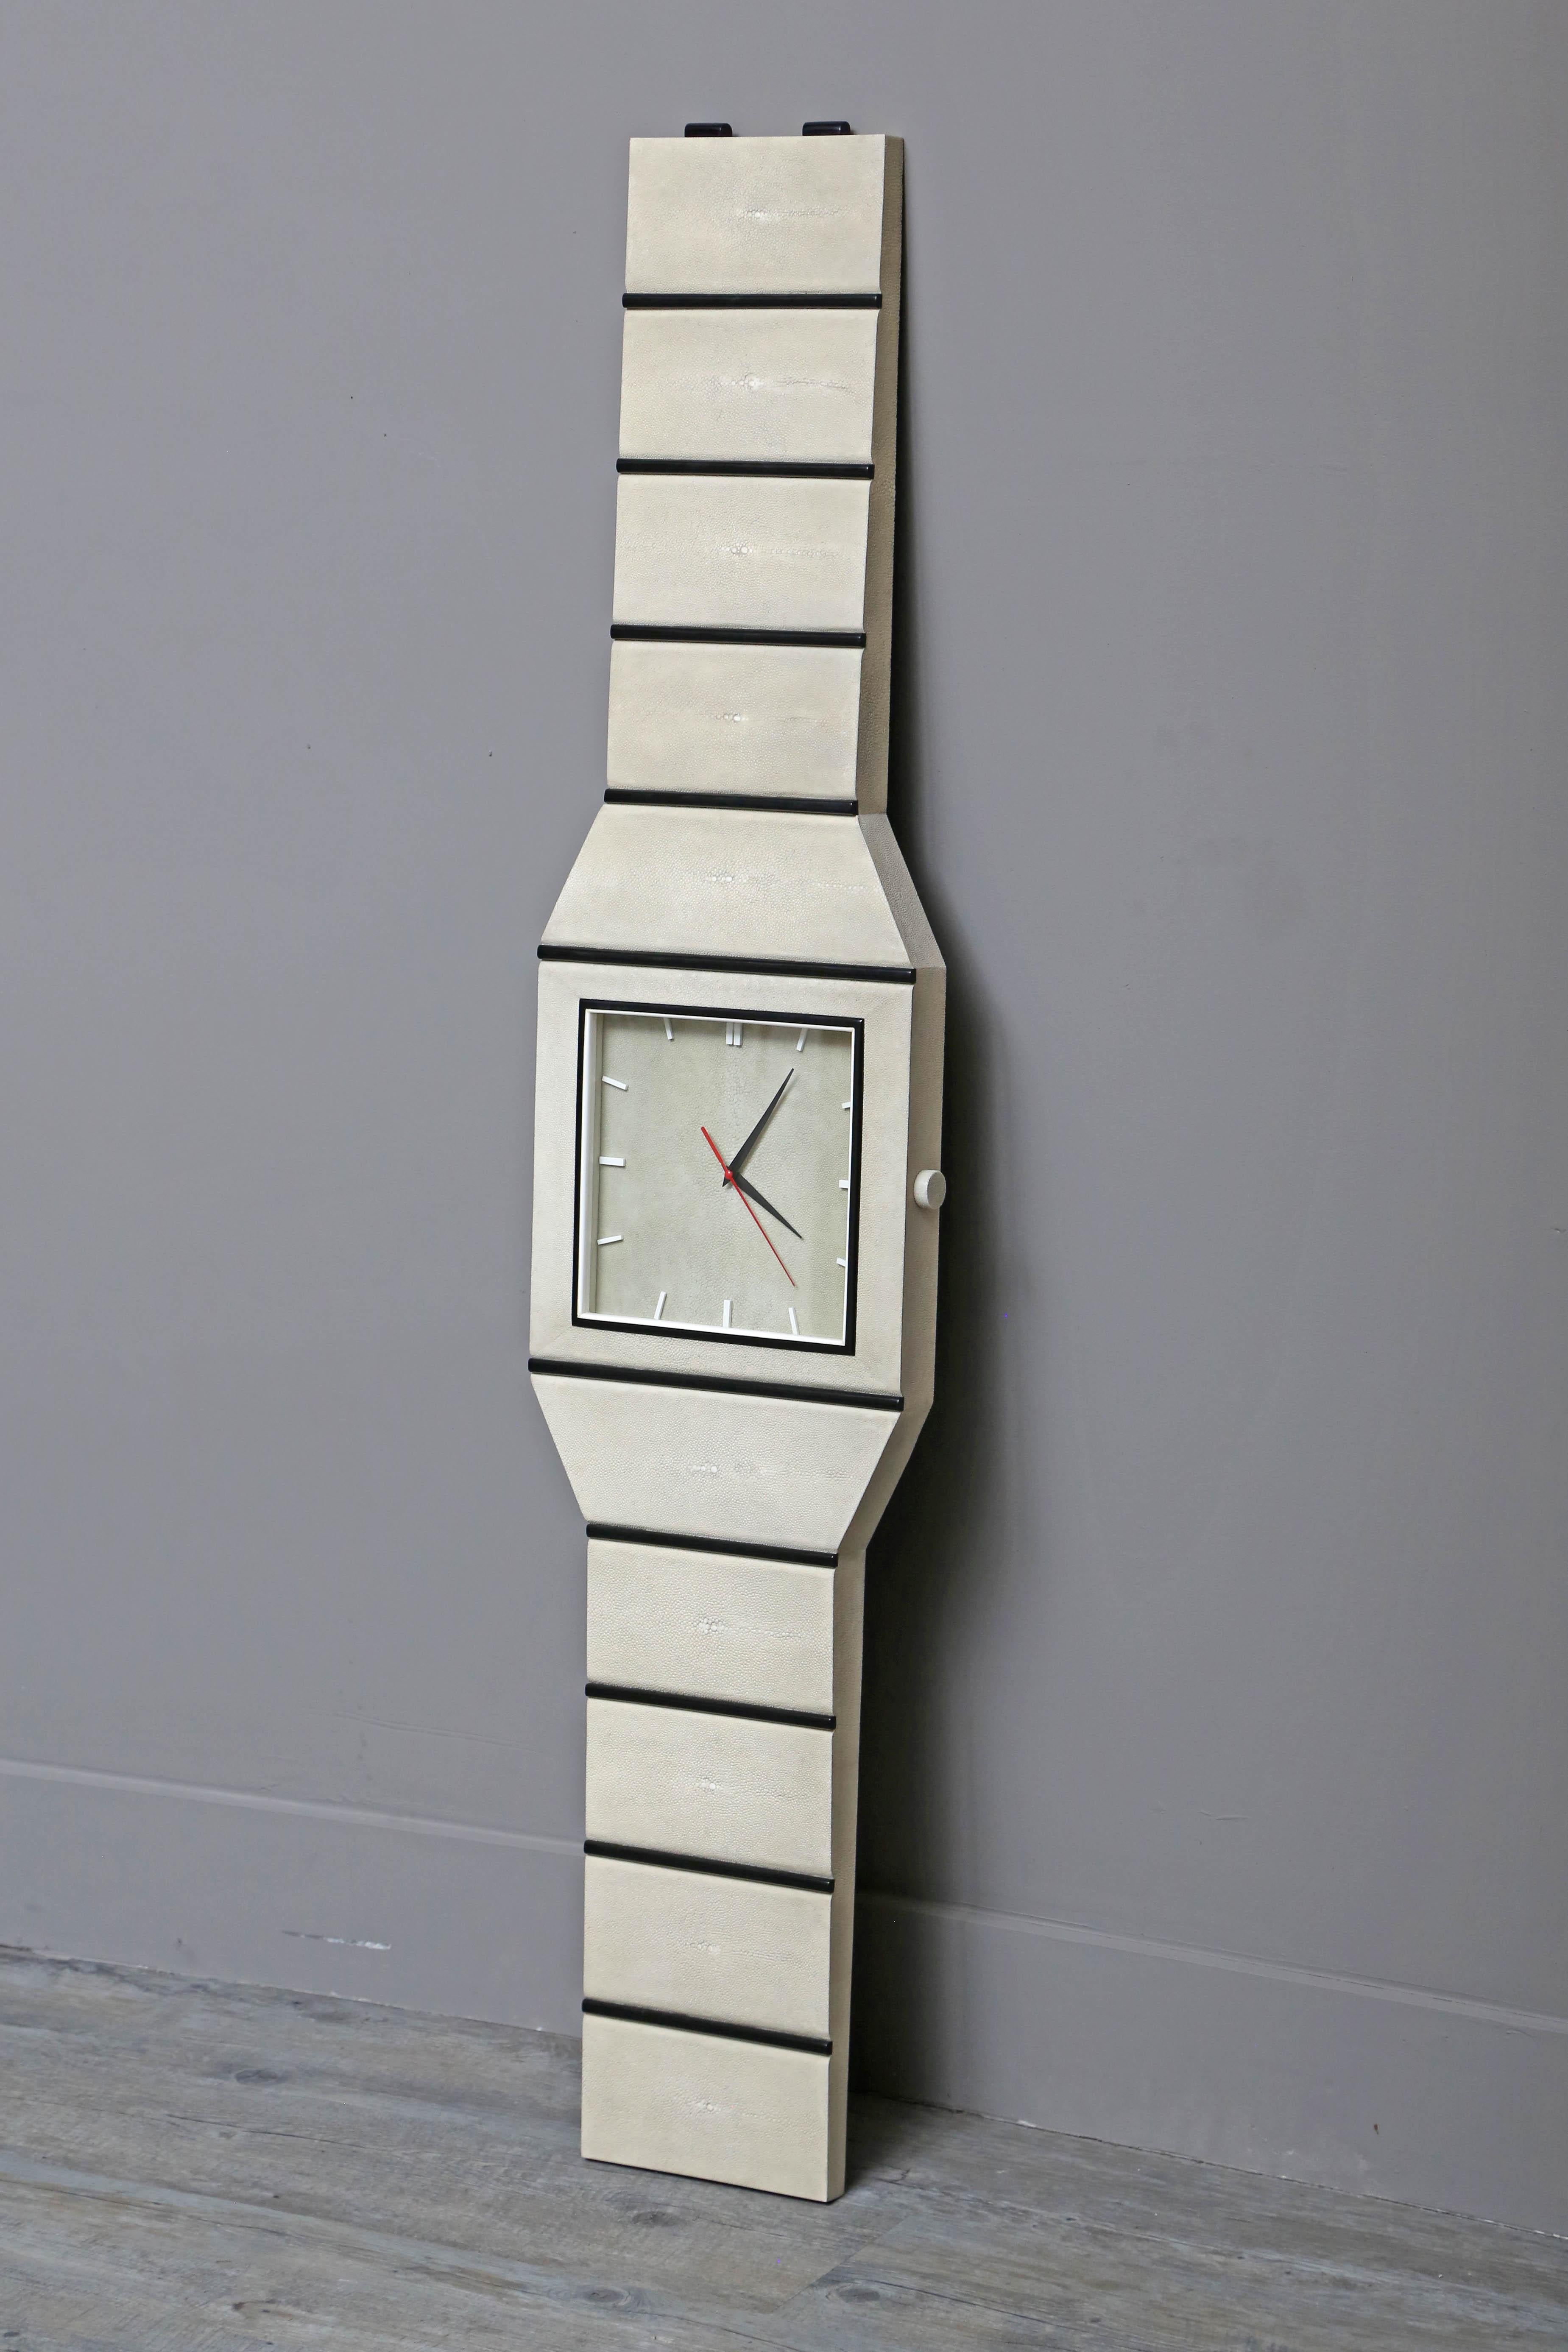 Whimsical wall clock in the form of a wristwatch fabricated in France by Serge de Troyer.